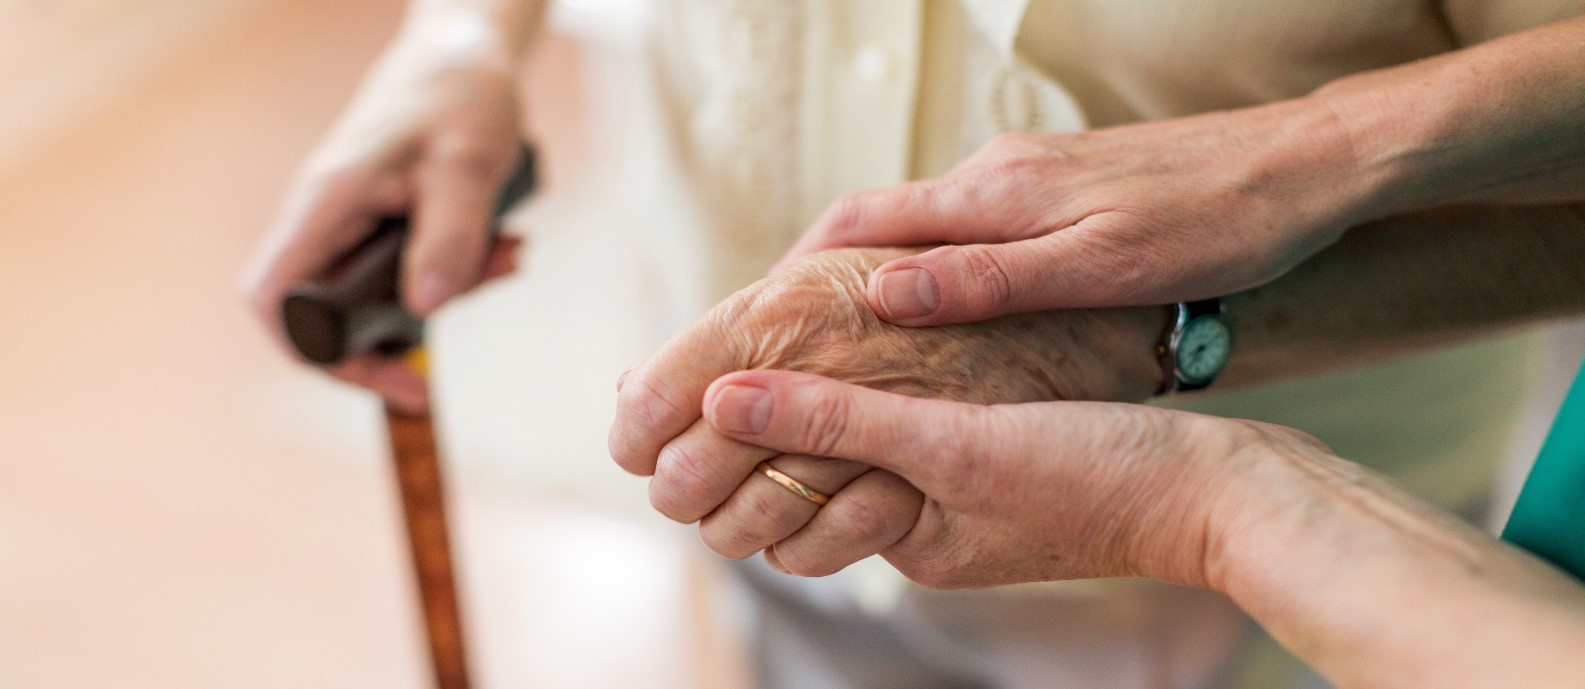 Person holding hands with elderly person who is using a walking stick